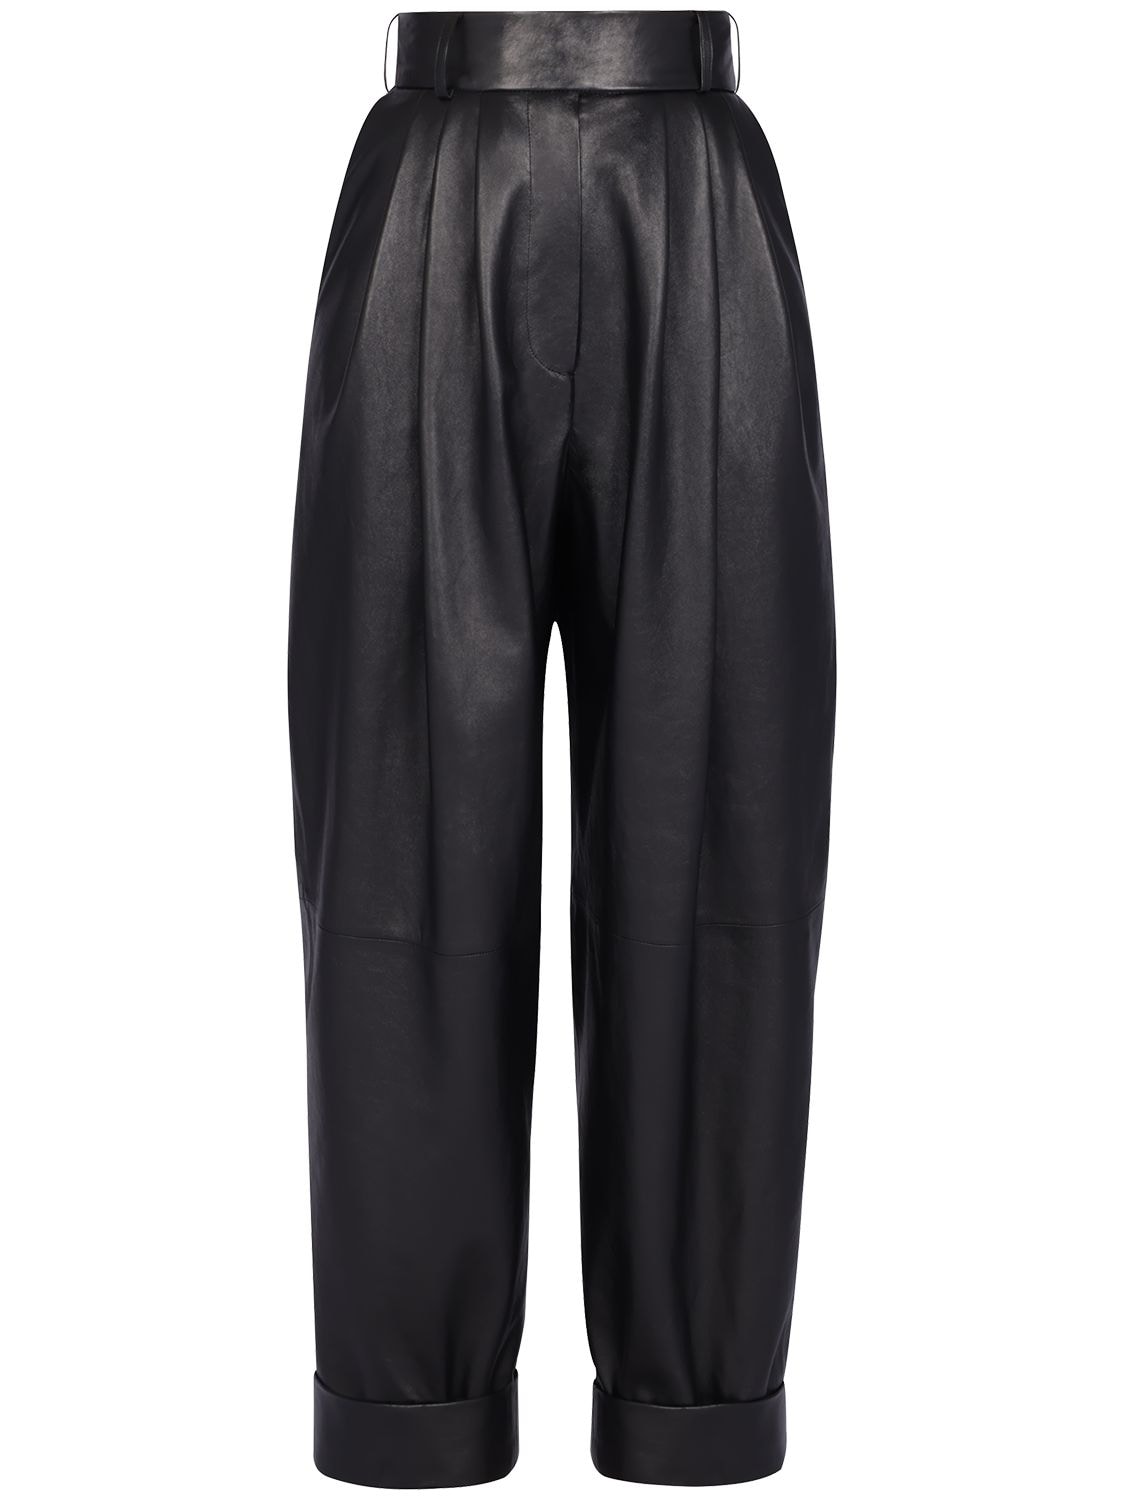 ALEXANDRE VAUTHIER Pleated Leather Pants